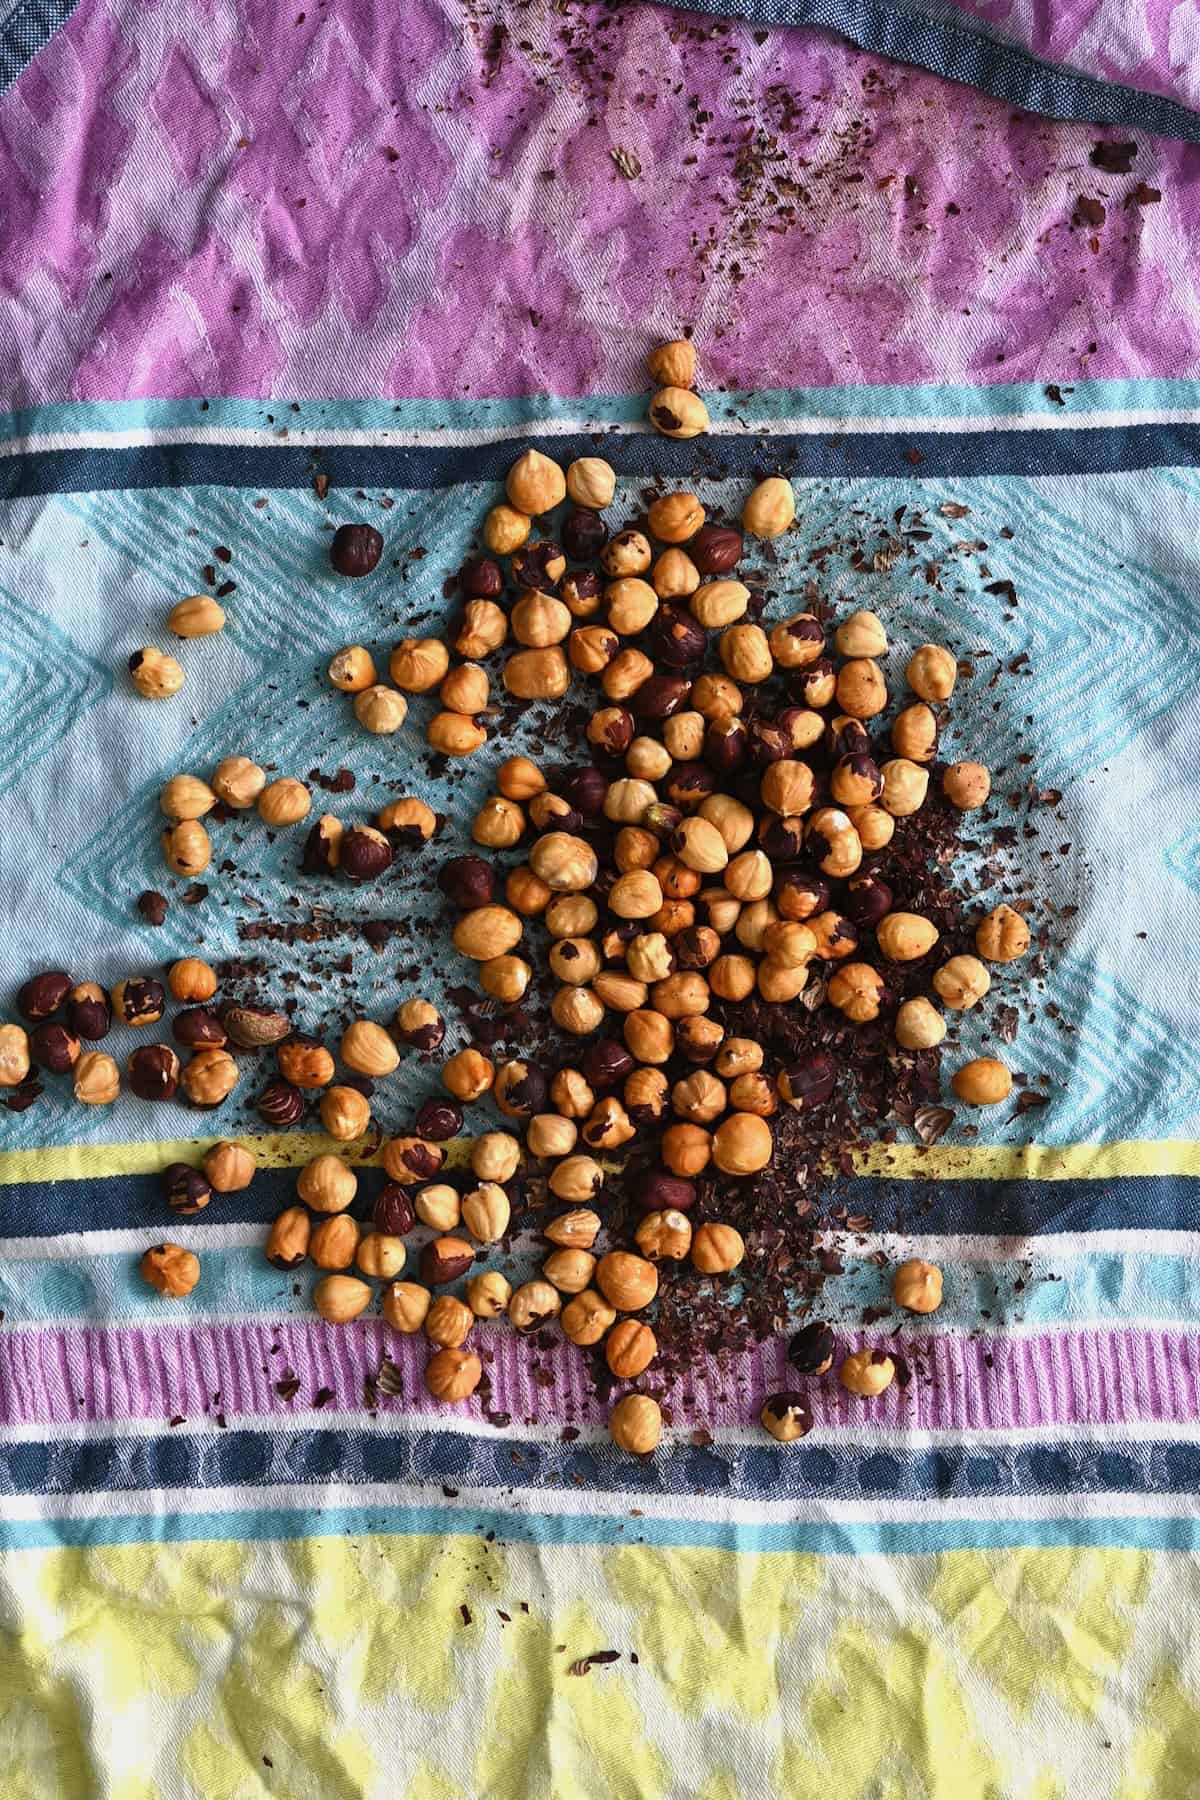 Hazelnuts on a kitchen towel with the skins removed